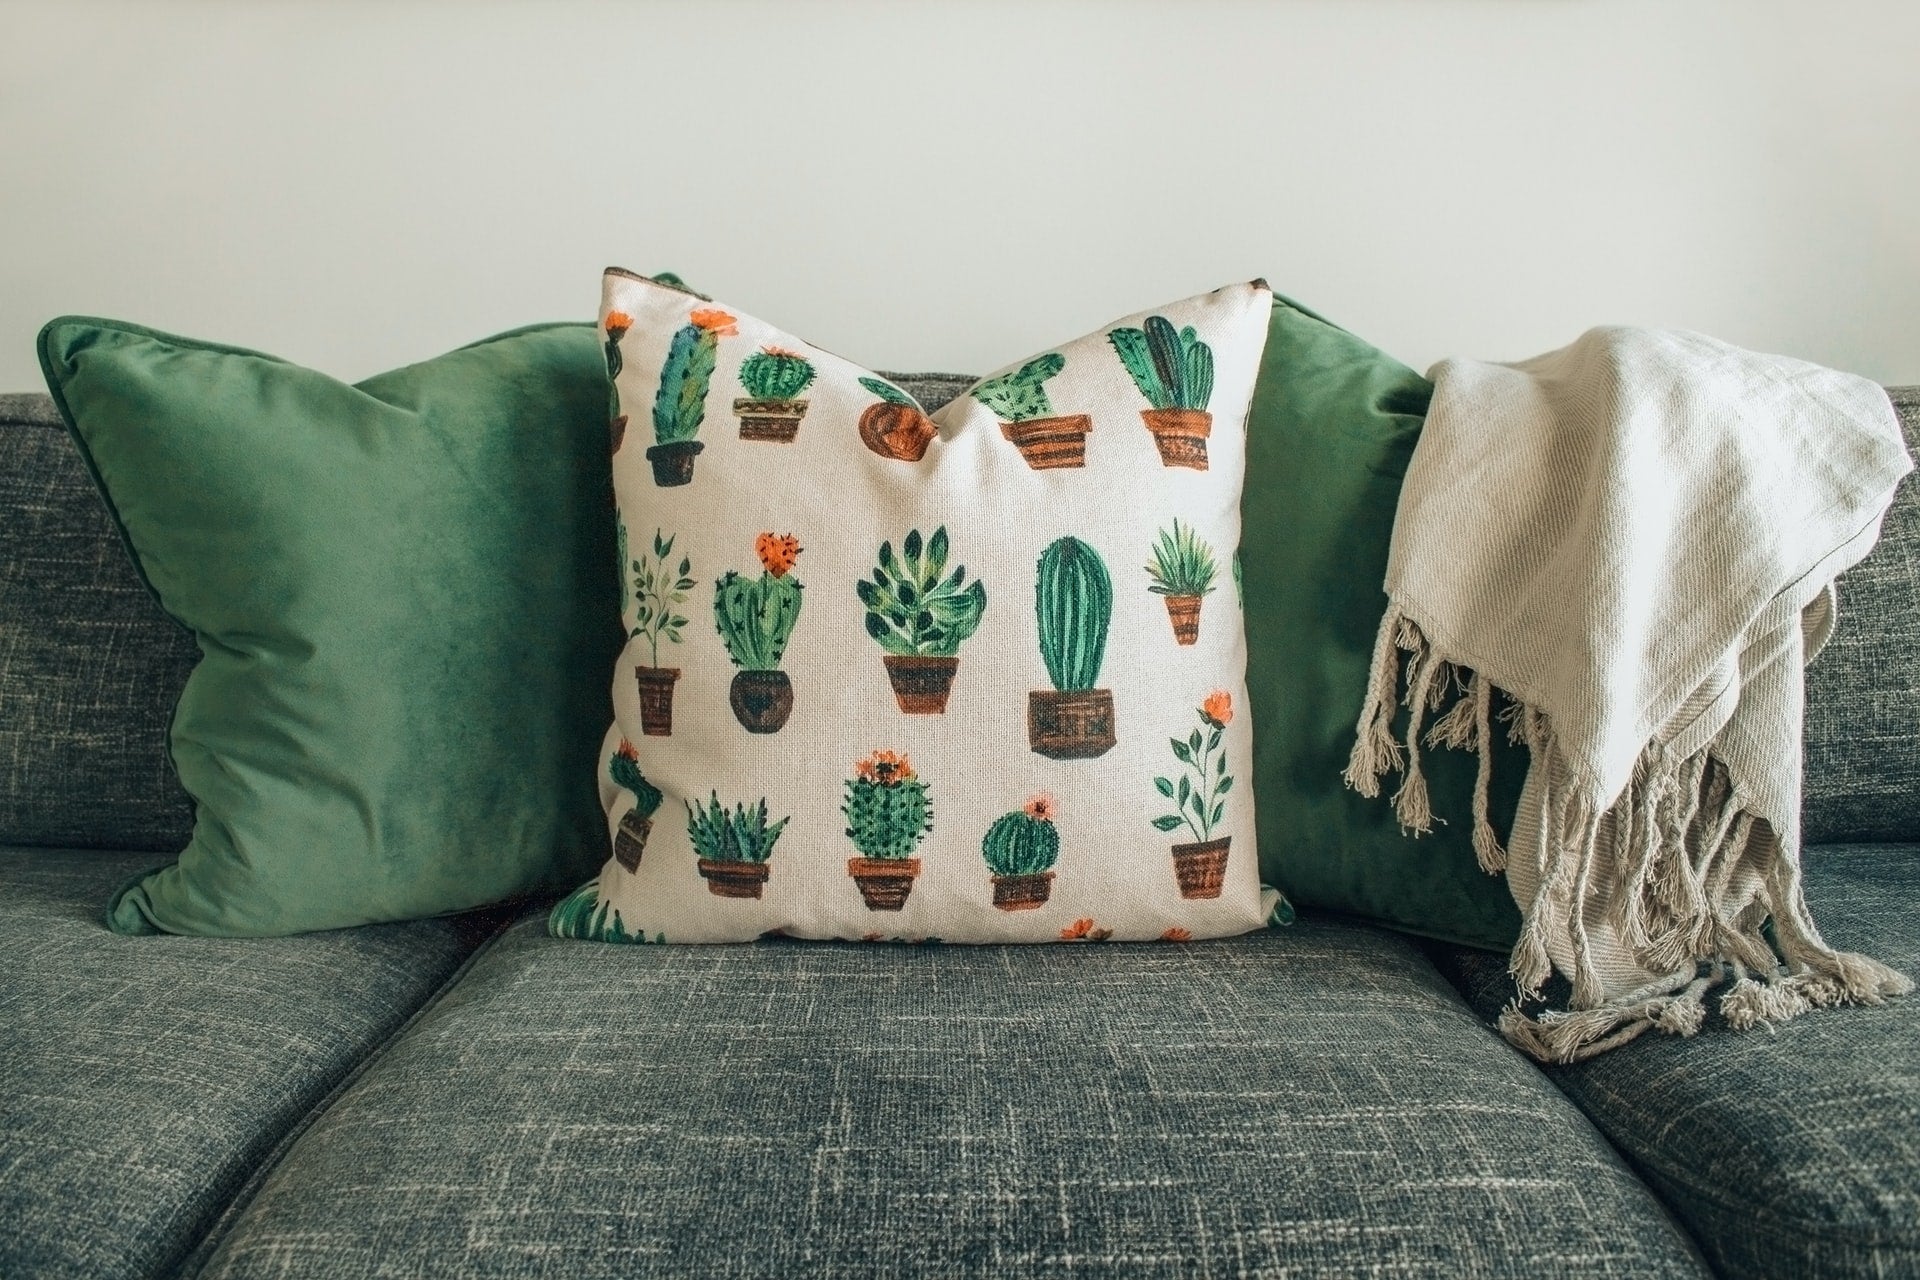 How to quickly wash couch pillows (easily!)